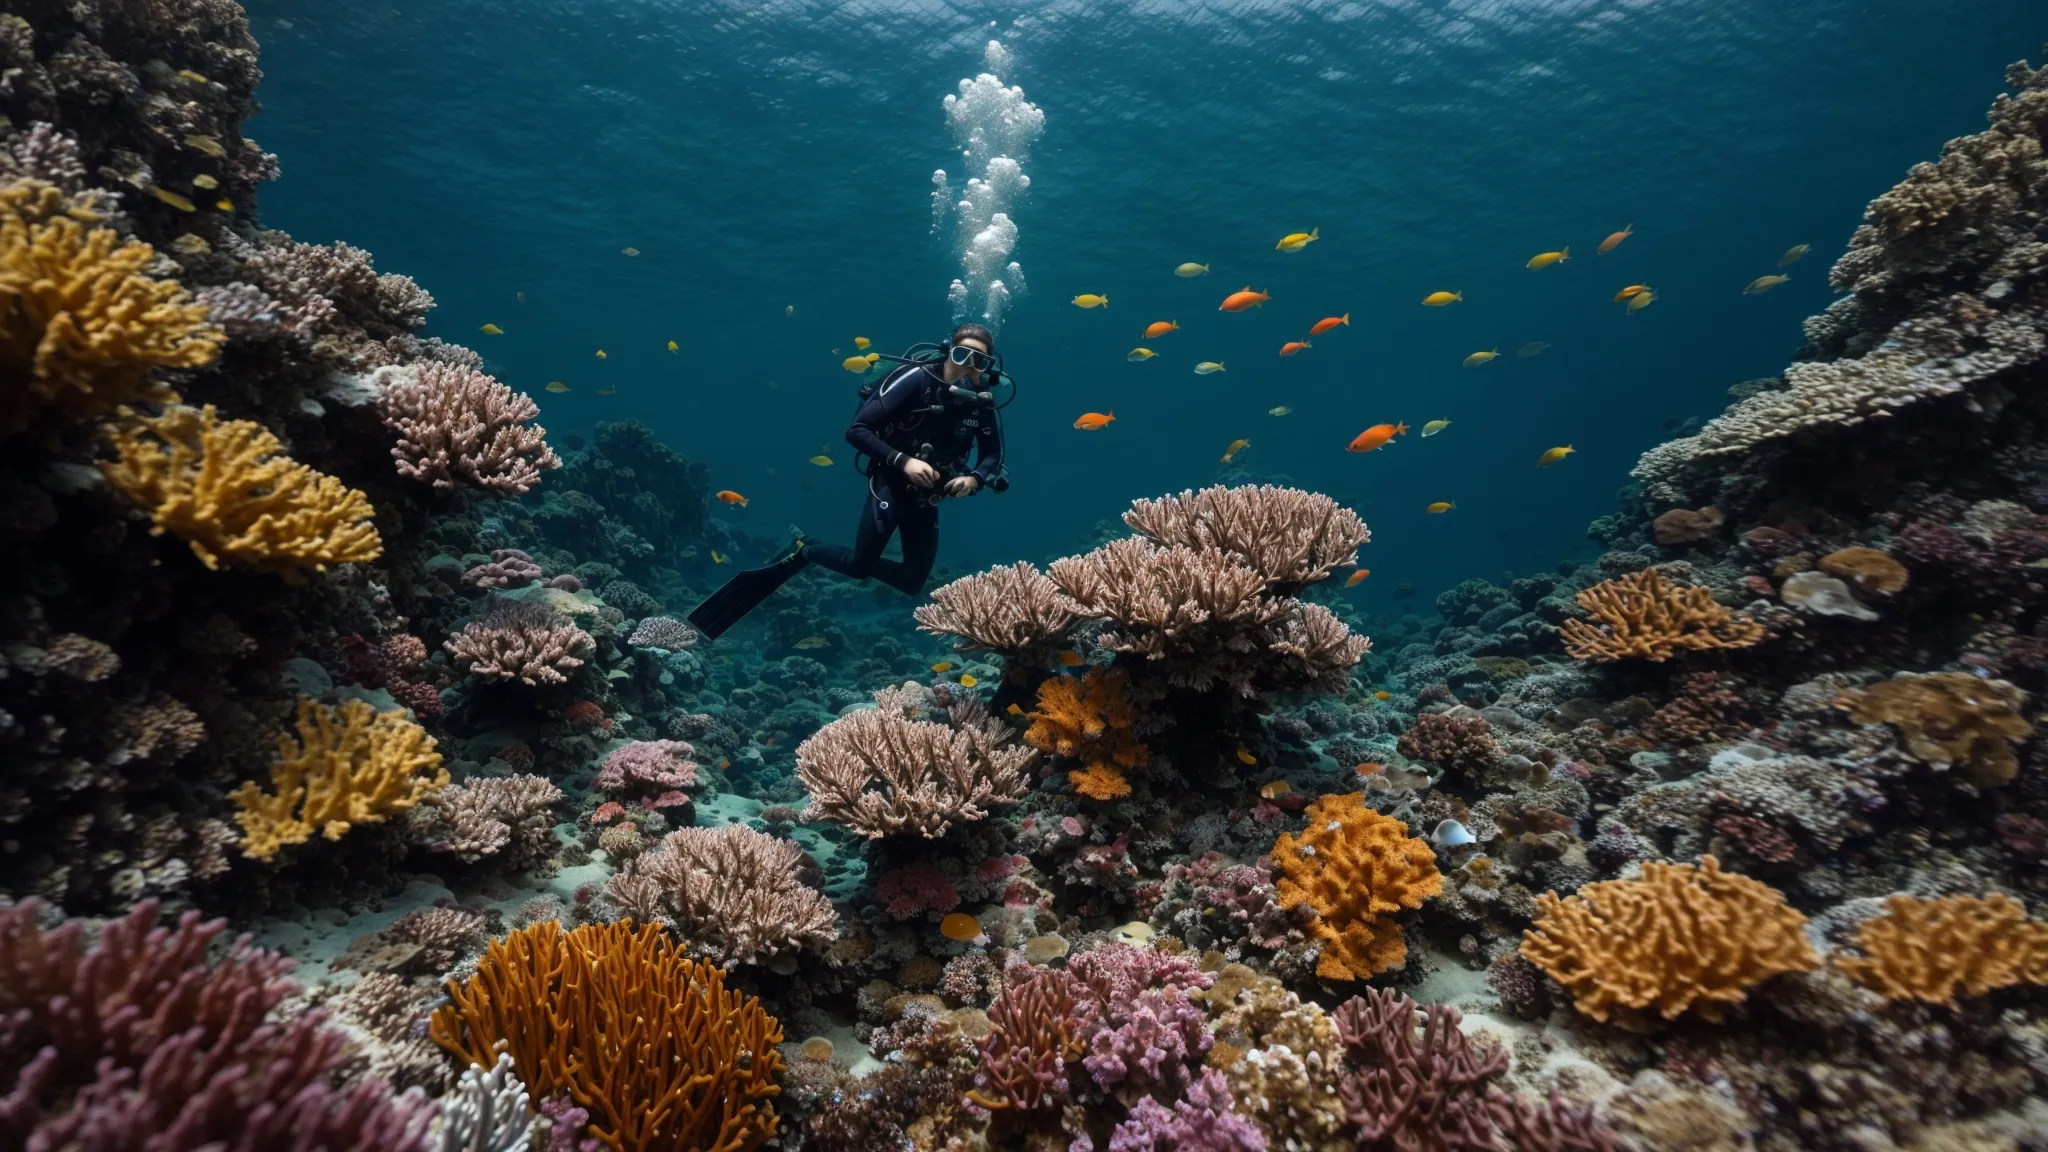 a diver swims near the ocean floor amidst a treasure trove of colorful corals, symbolizing the exploration for valuable search terms.